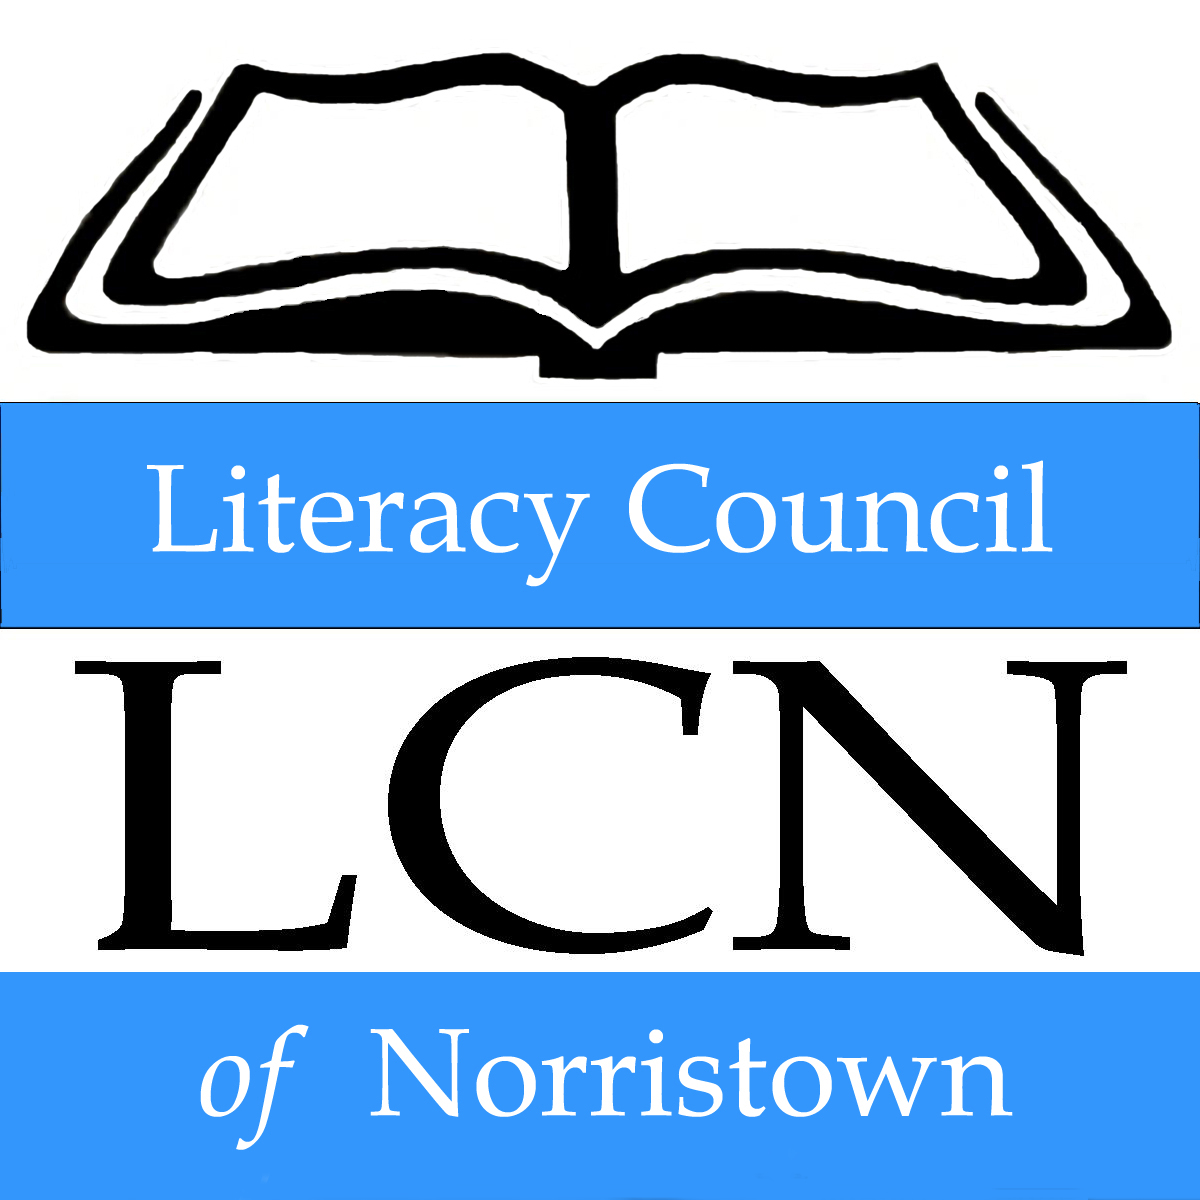 Literacy Council of Norristown logo